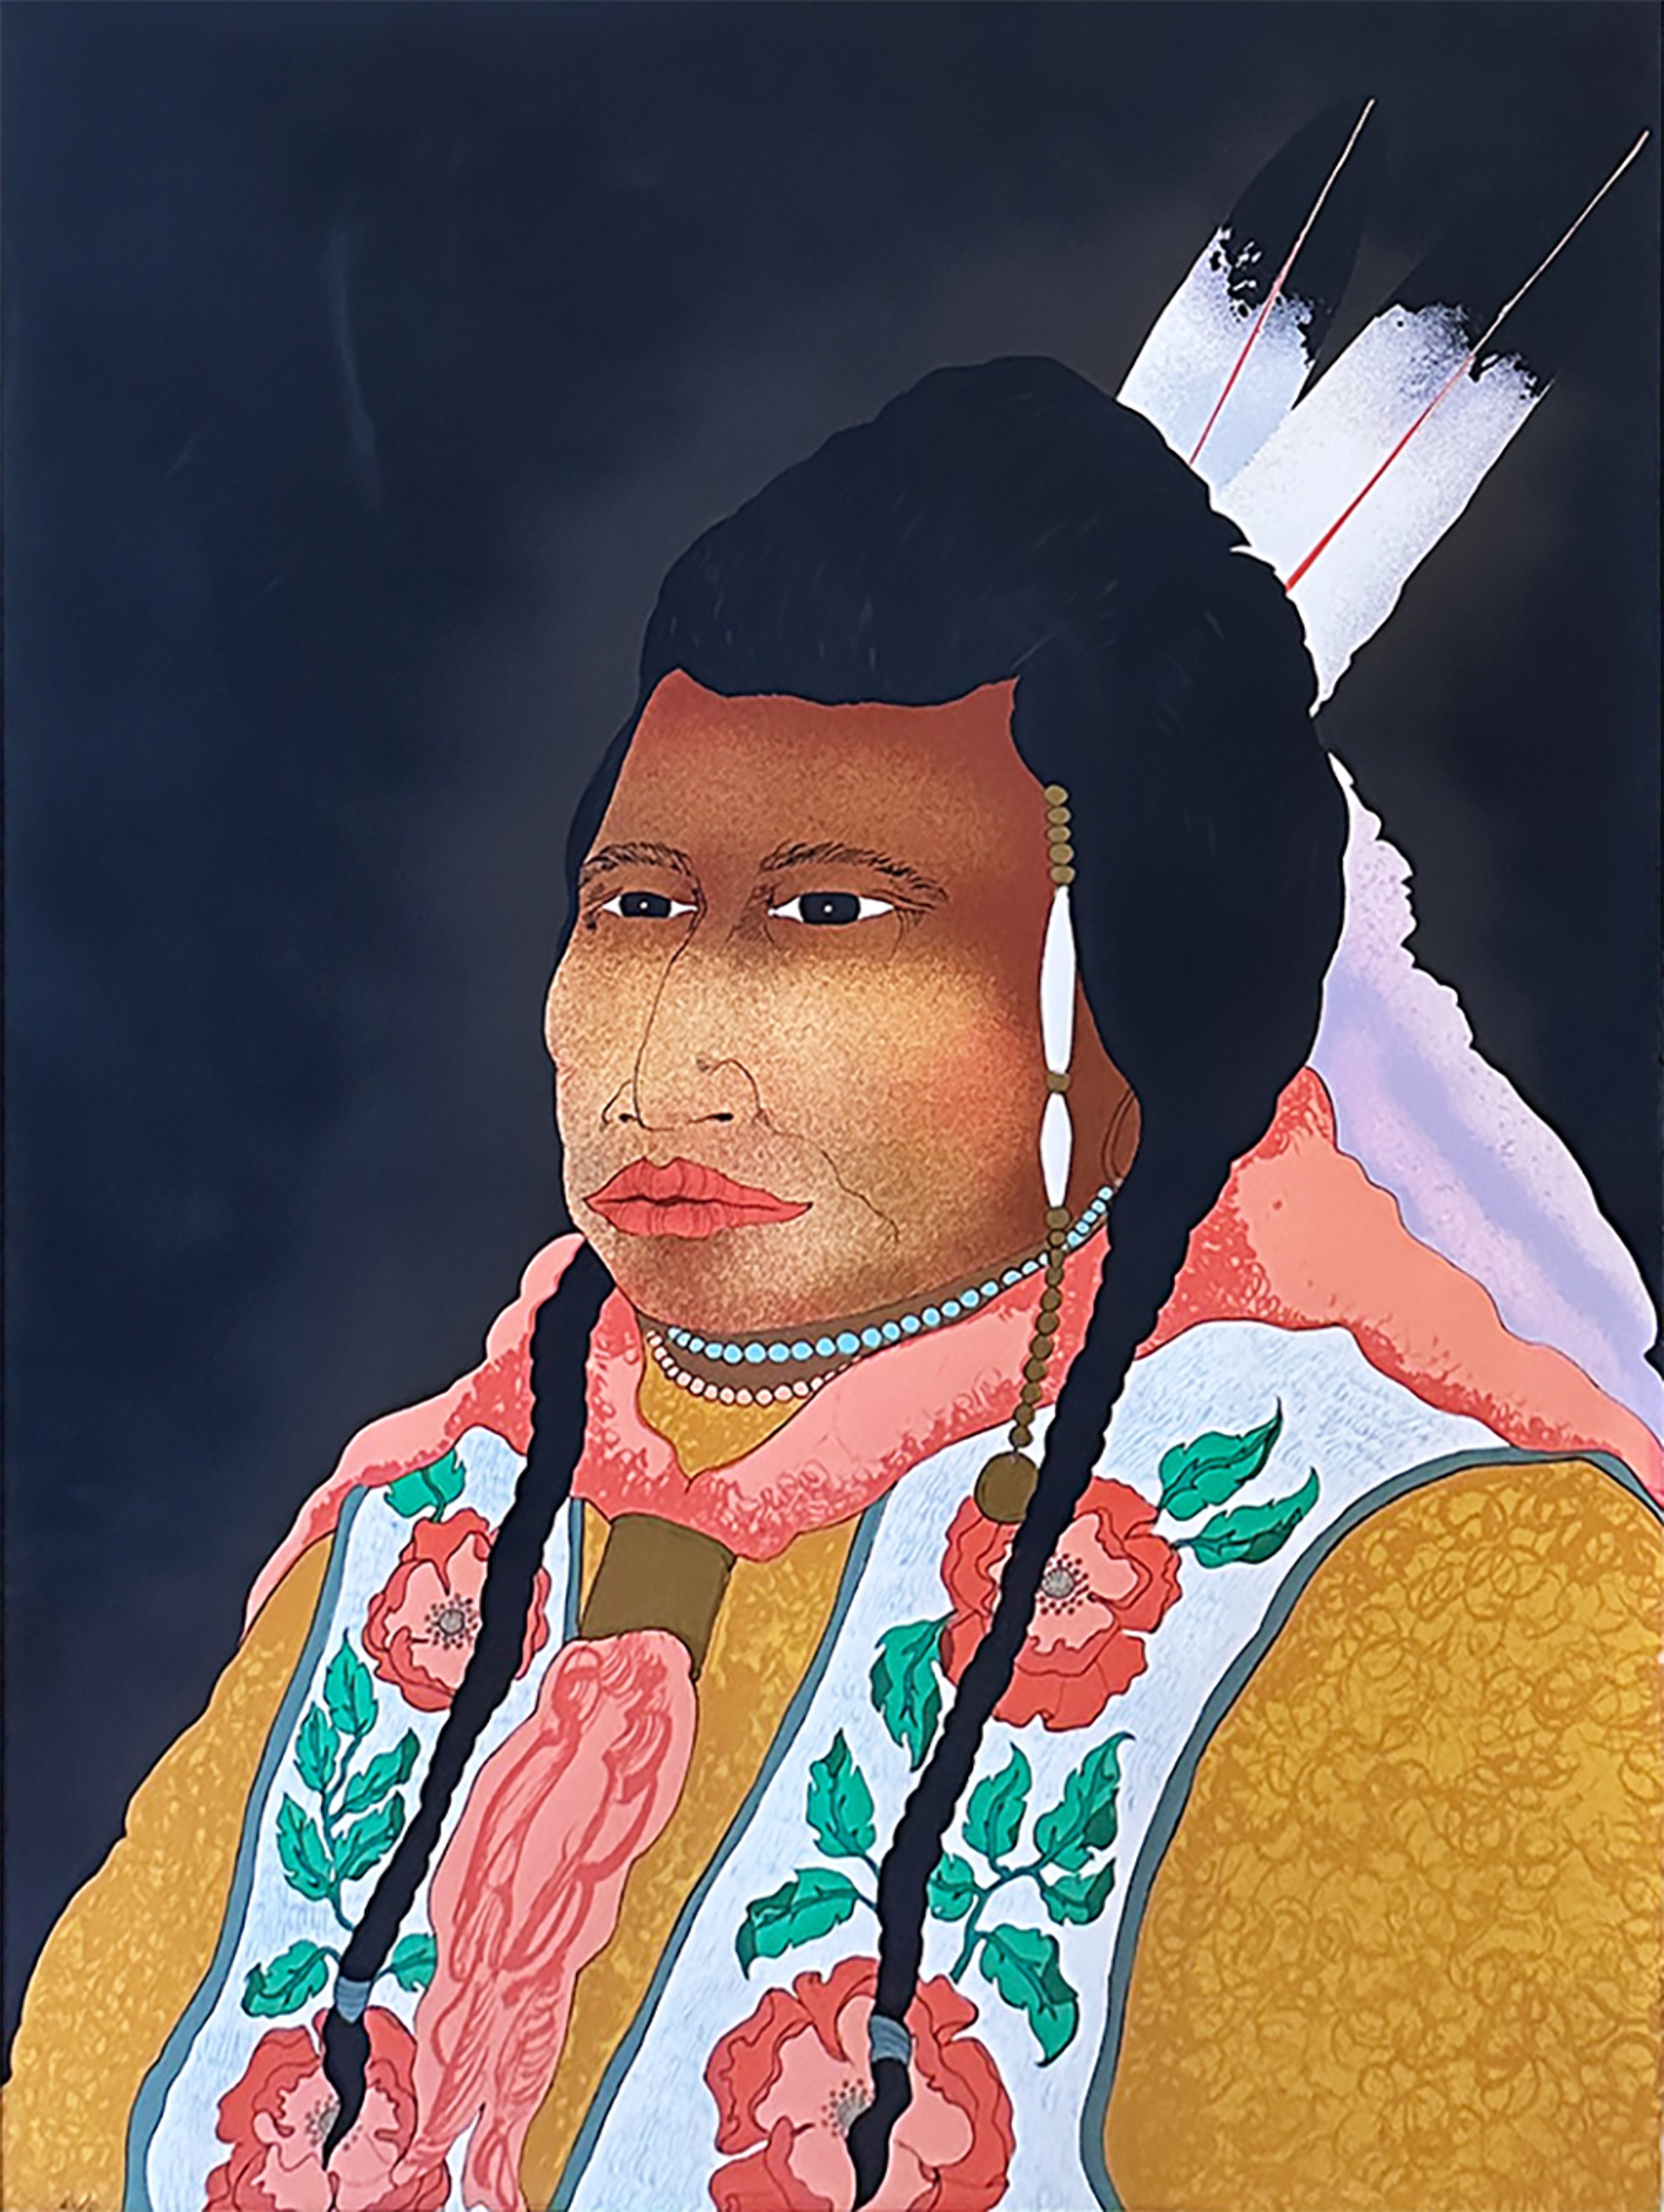 Indian with Flowered Vest by Kevin Red Star